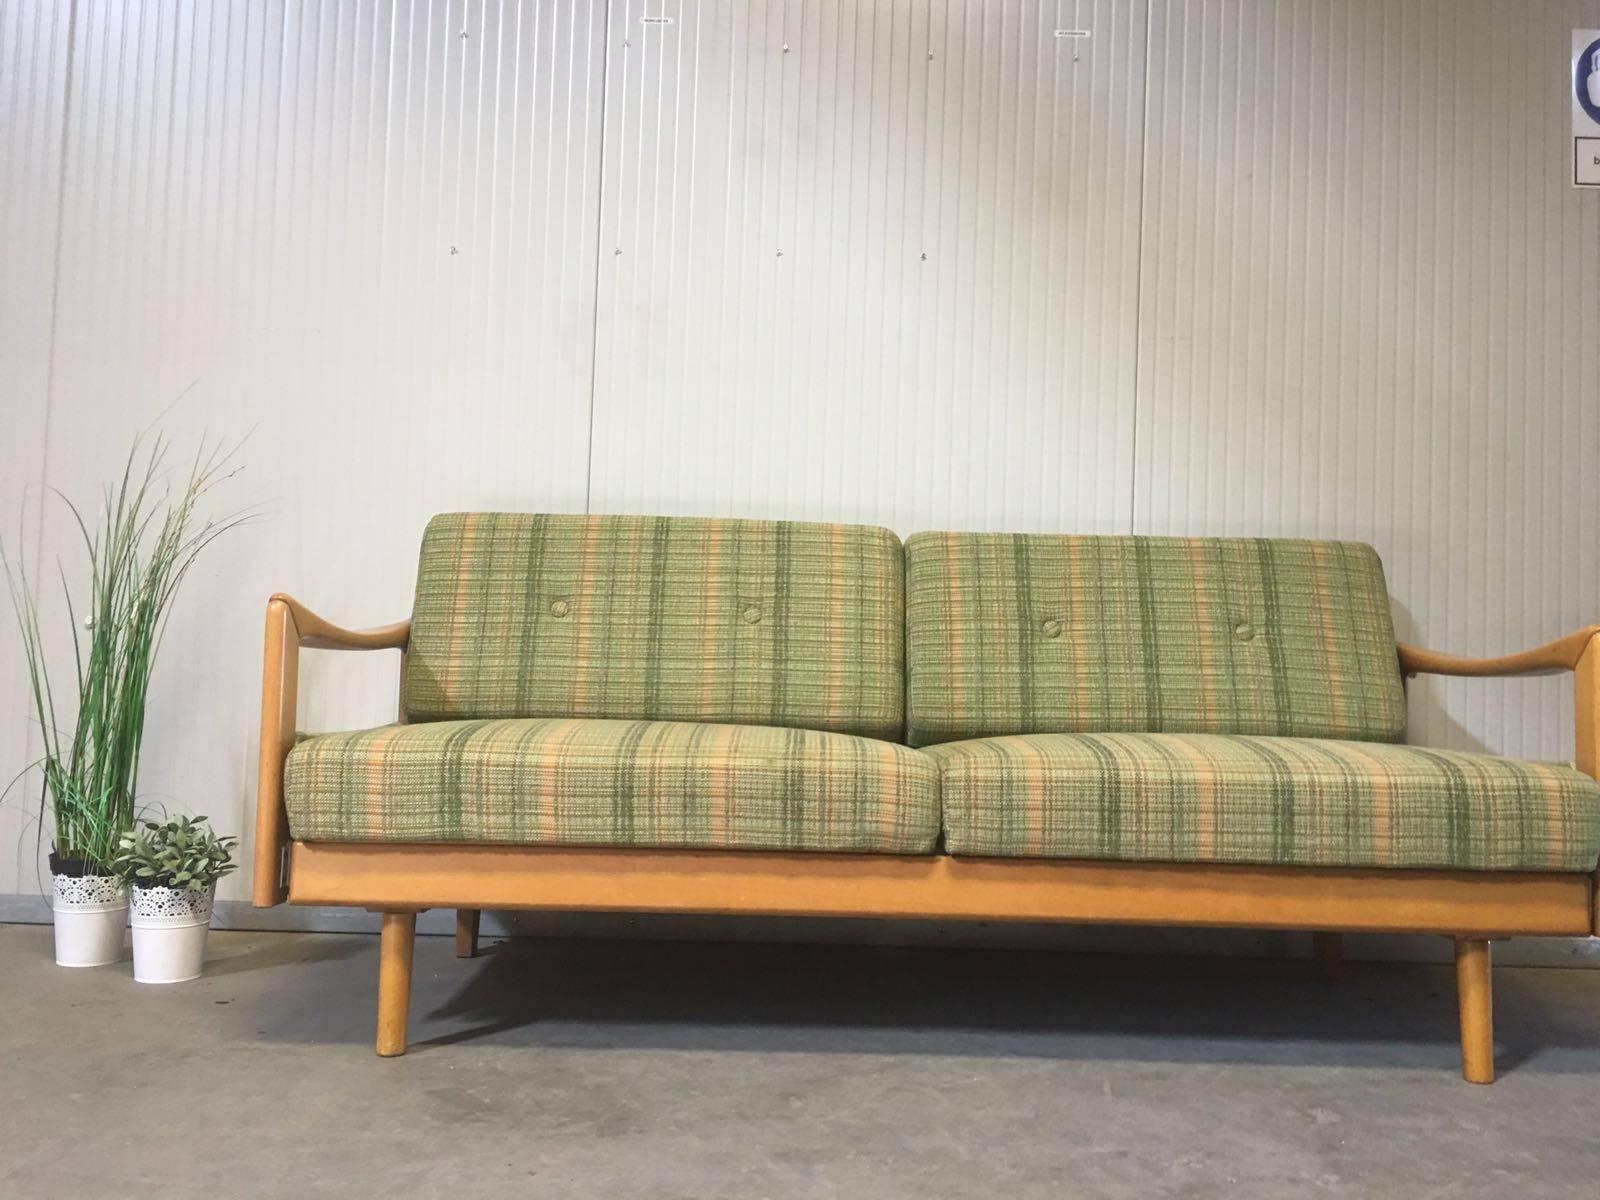 Mid-20th Century Knoll Sofa - Daybed in Original Upholstery For Sale